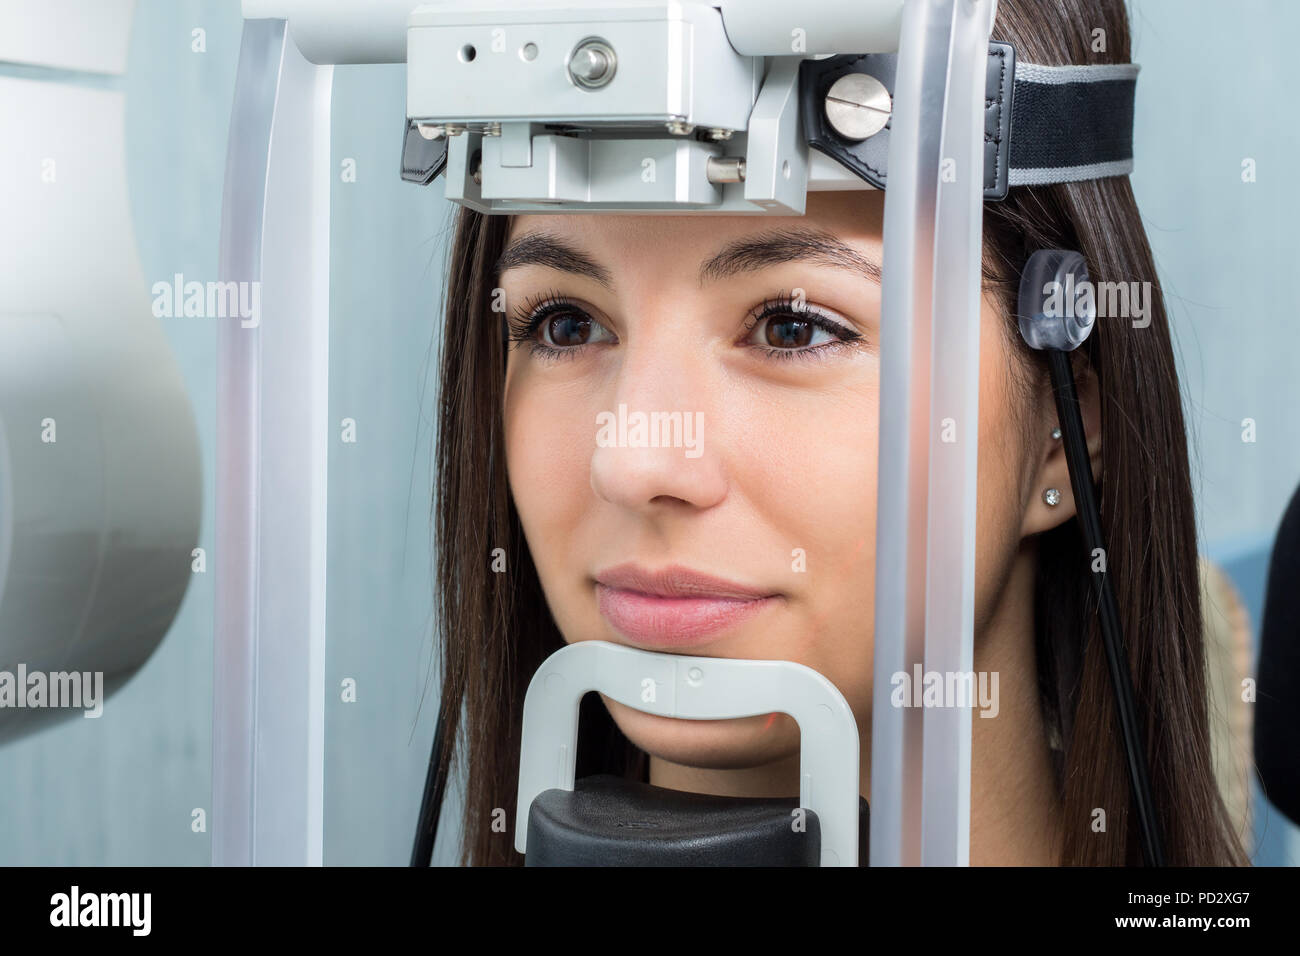 Close up face shot of girl with head positioned in cephalometric panorama x-ray machine. Stock Photo